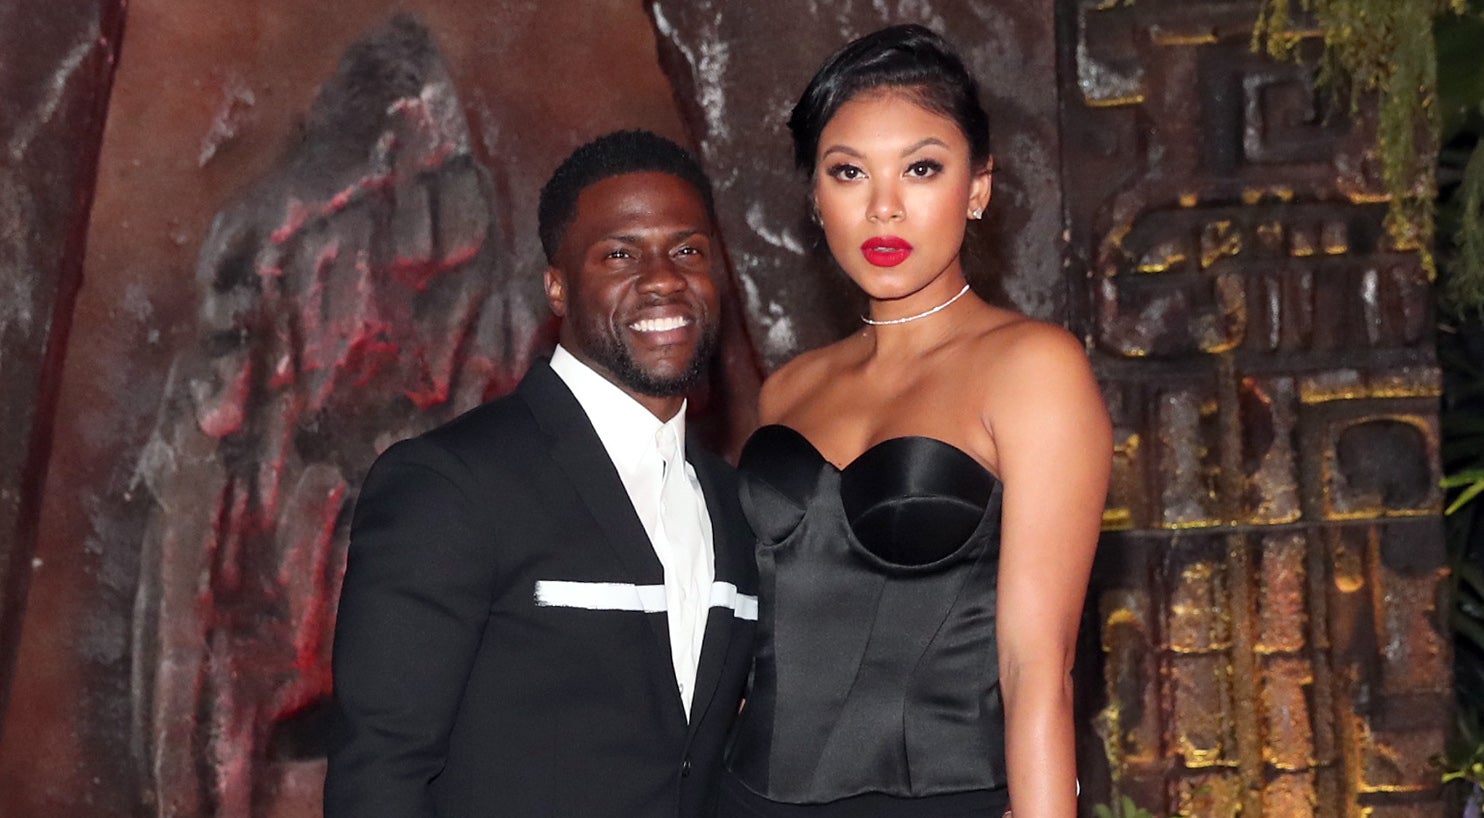 Kevin Hart's Wife Eniko Speaks On His Cheating Scandal In New Netflix Documentary